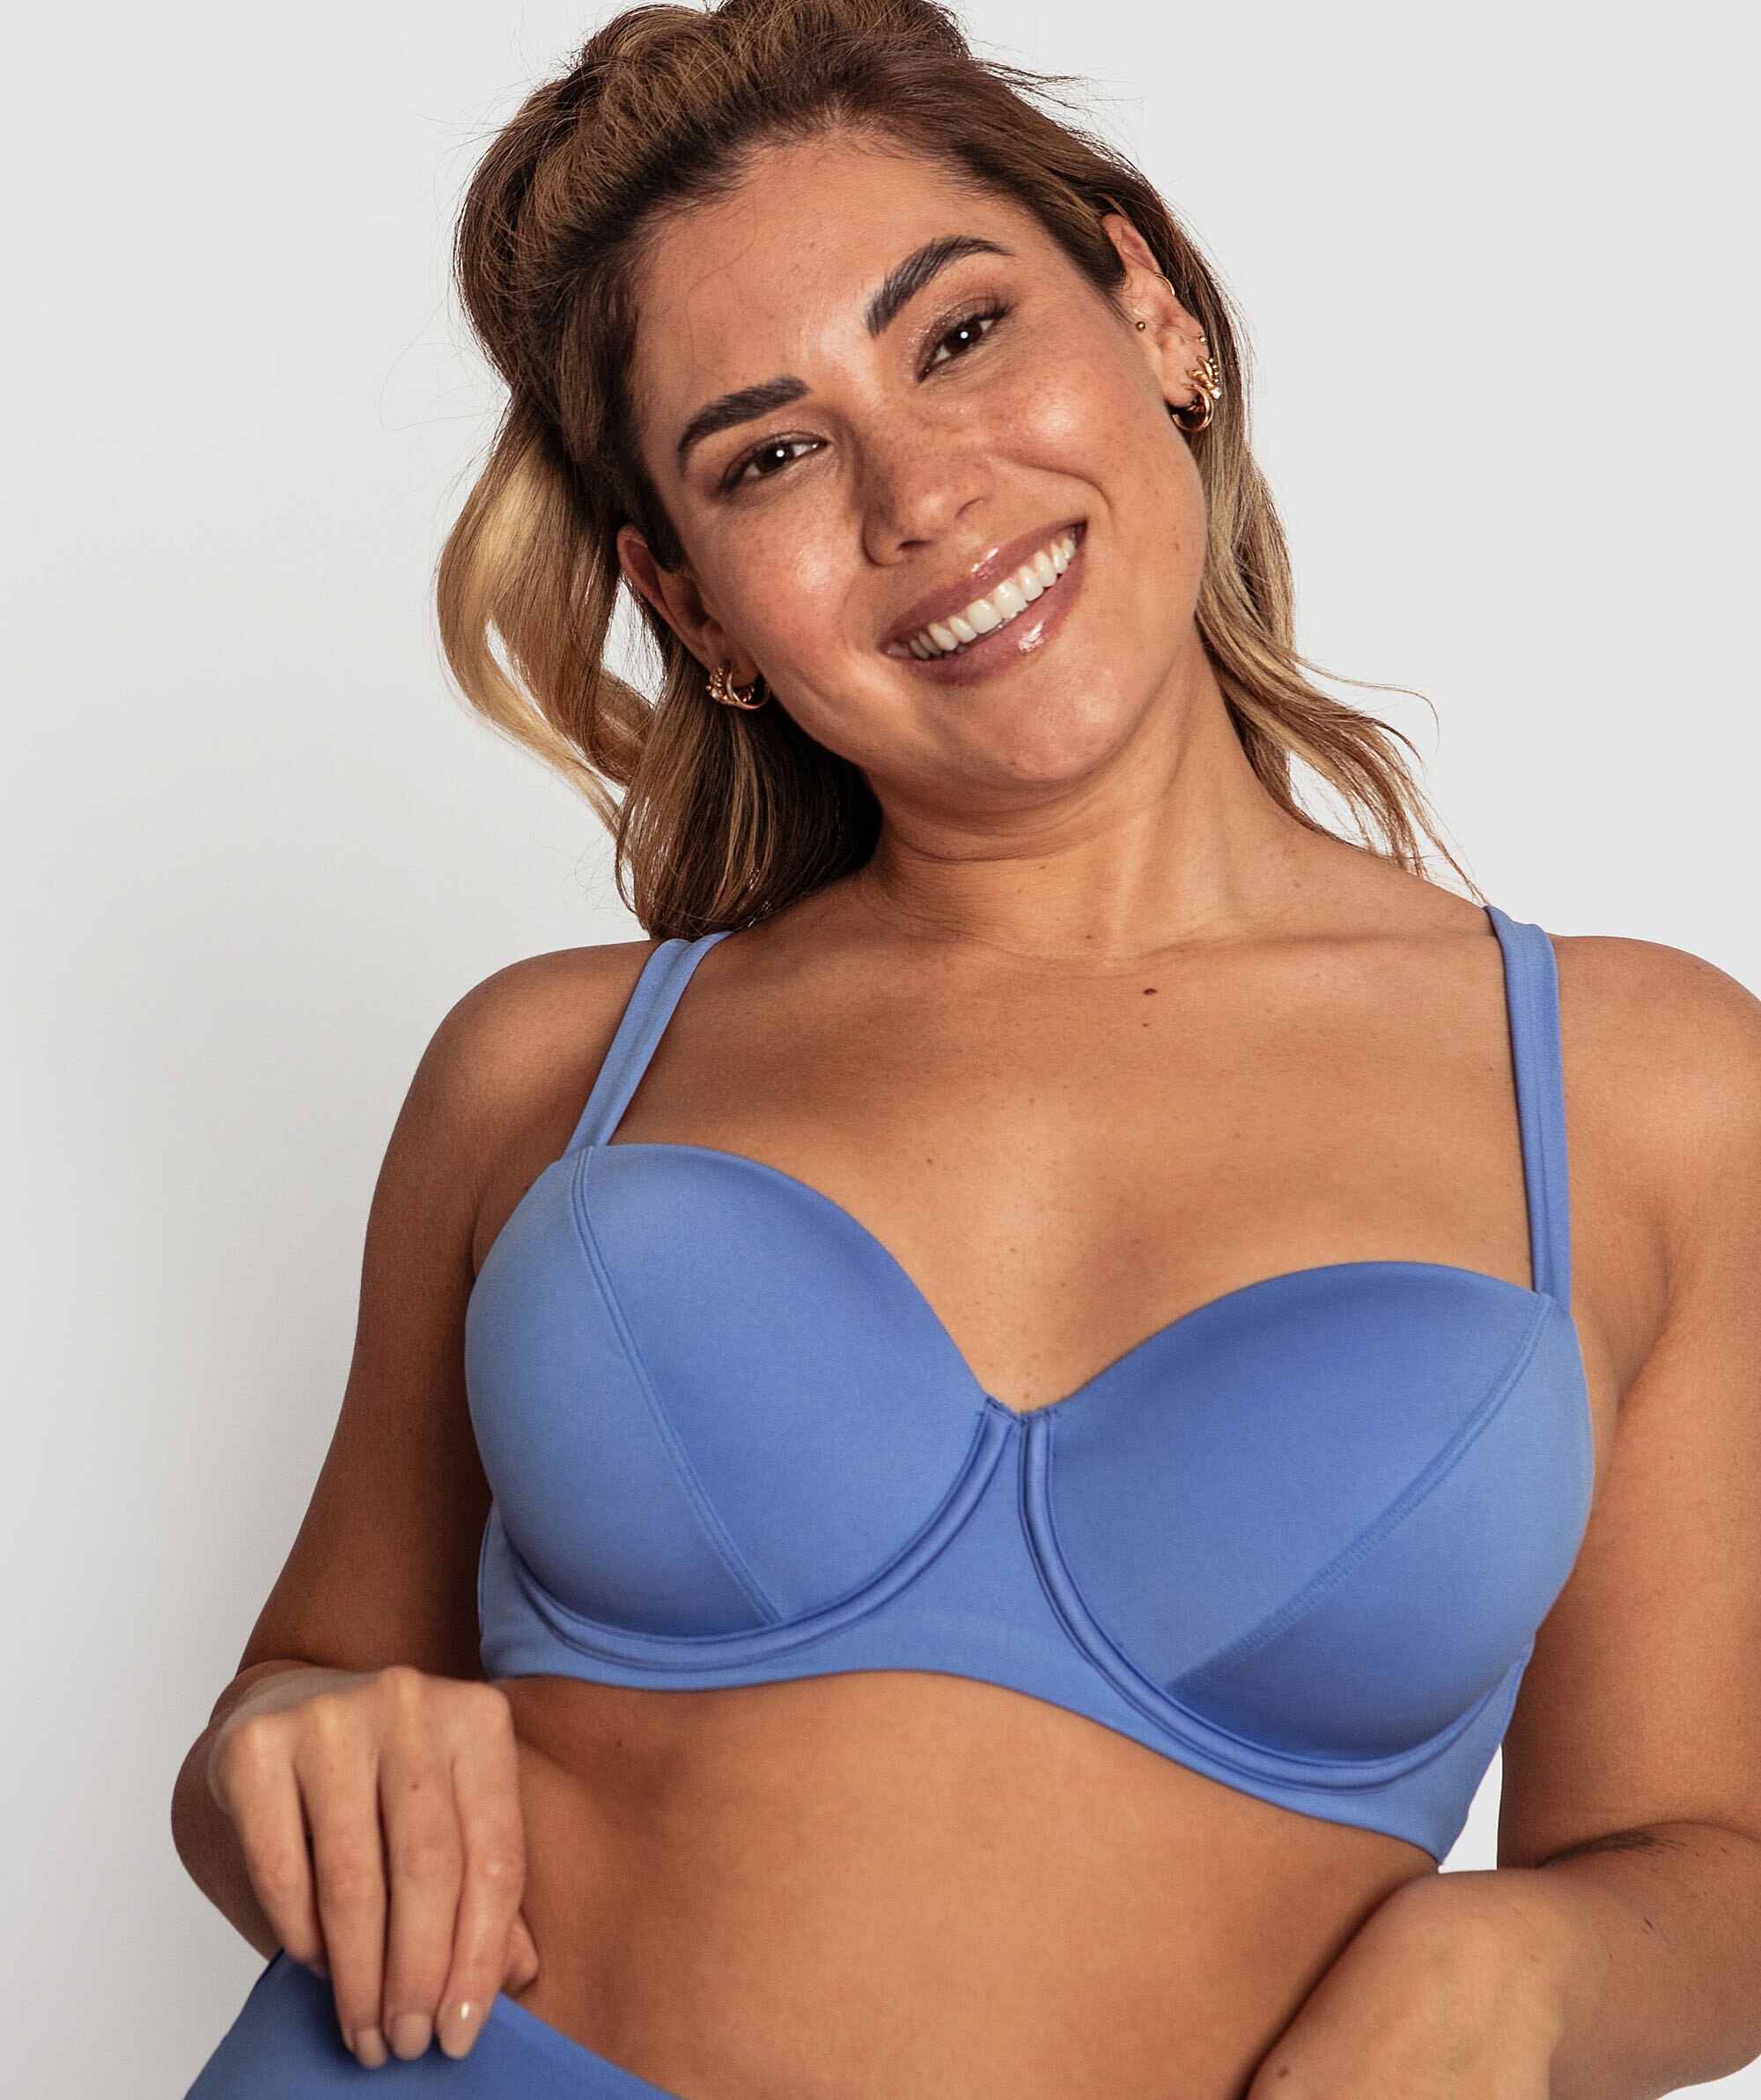 Planet Bliss Swim Full Cup Top - Teal